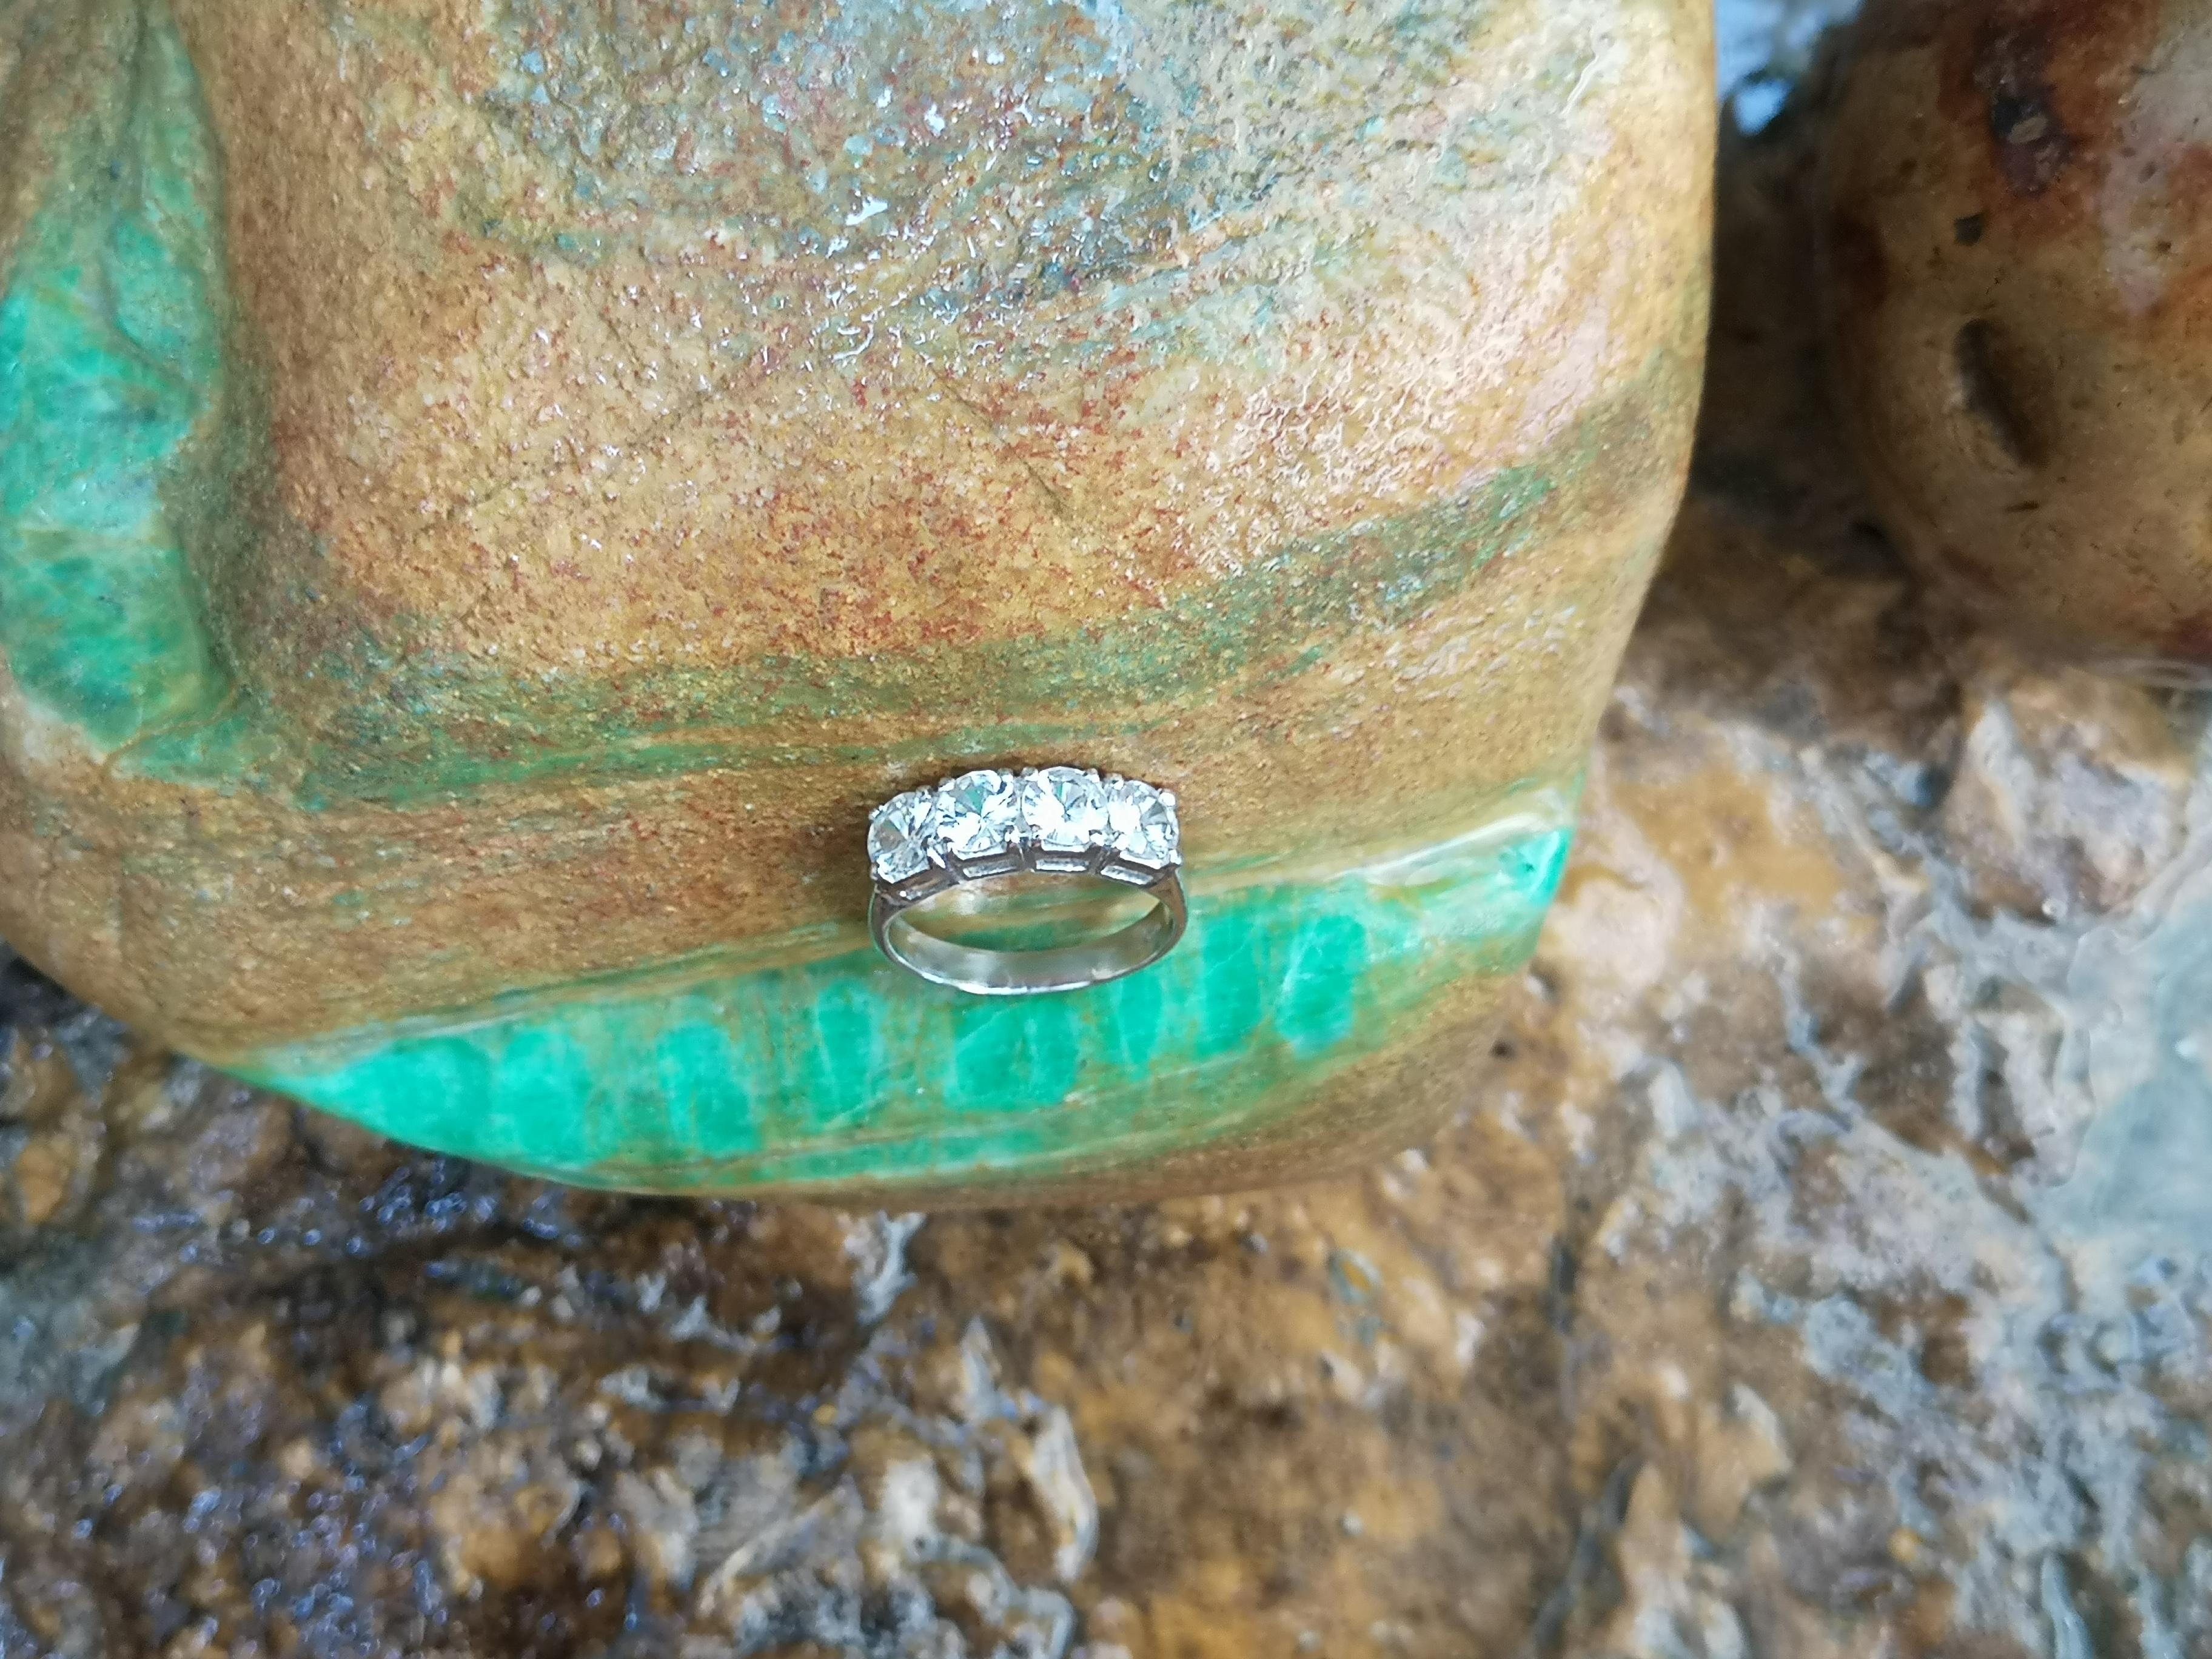 1.7 cm to ring size